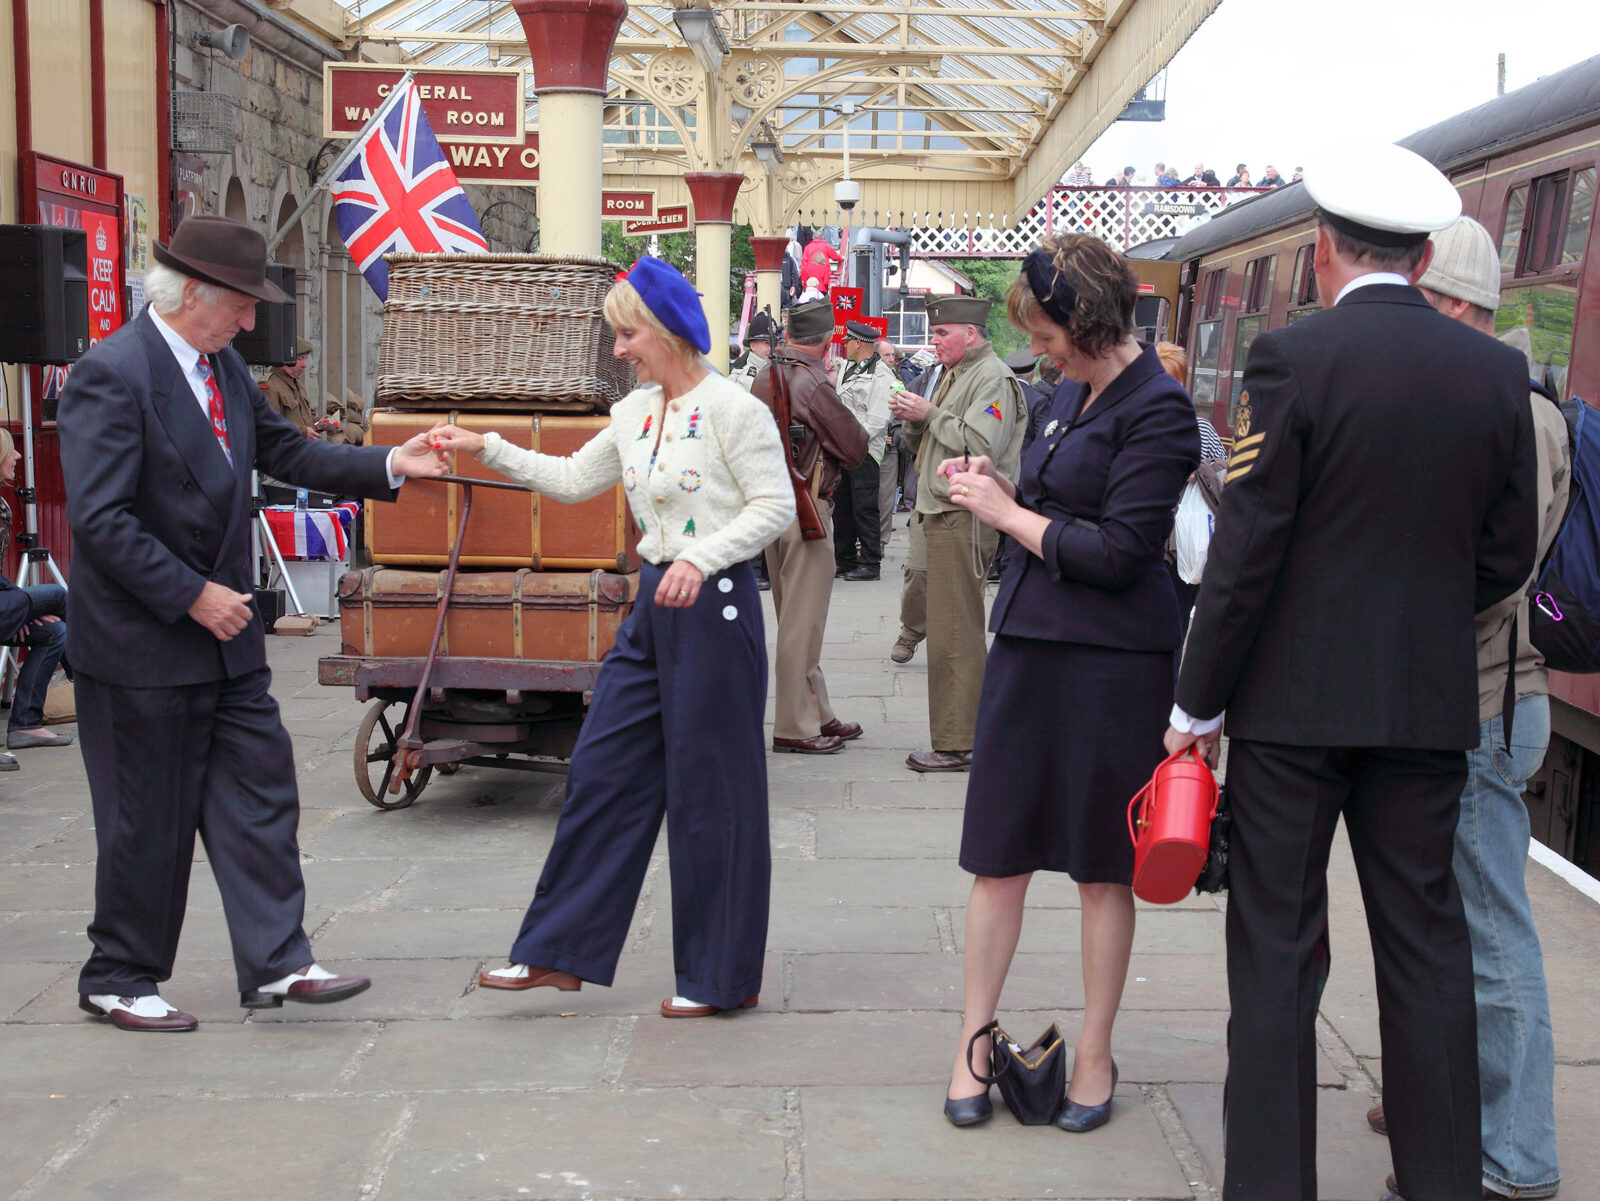 People named Elizabeth can get a free steam train ride to celebrate the Queen&#8217;s Jubilee, The Manc